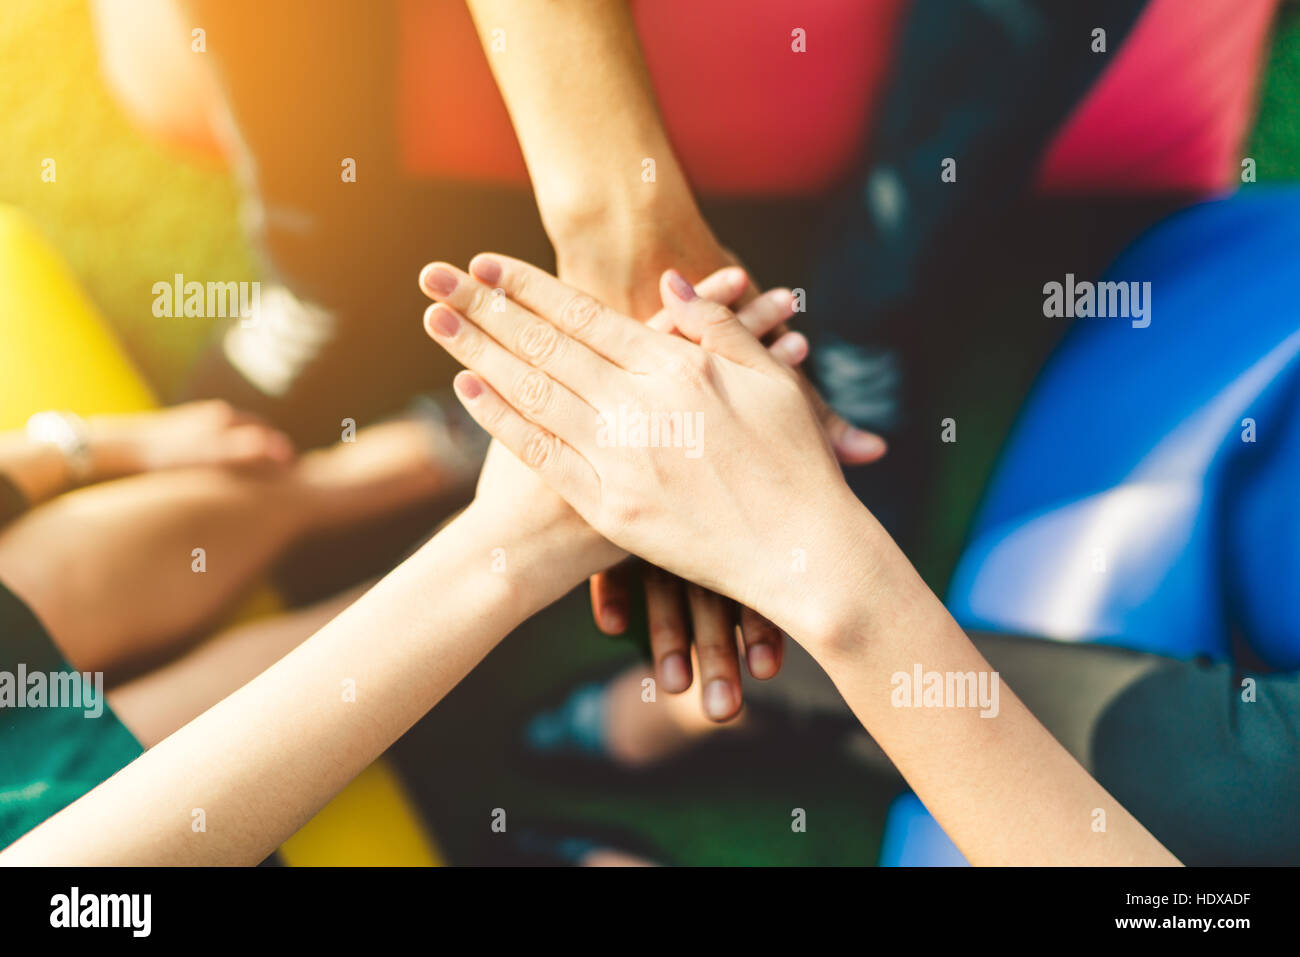 Three young business people joining hands team up, teamwork or unity concept, multi-ethnic diversity group, warm light and depth of field effect Stock Photo